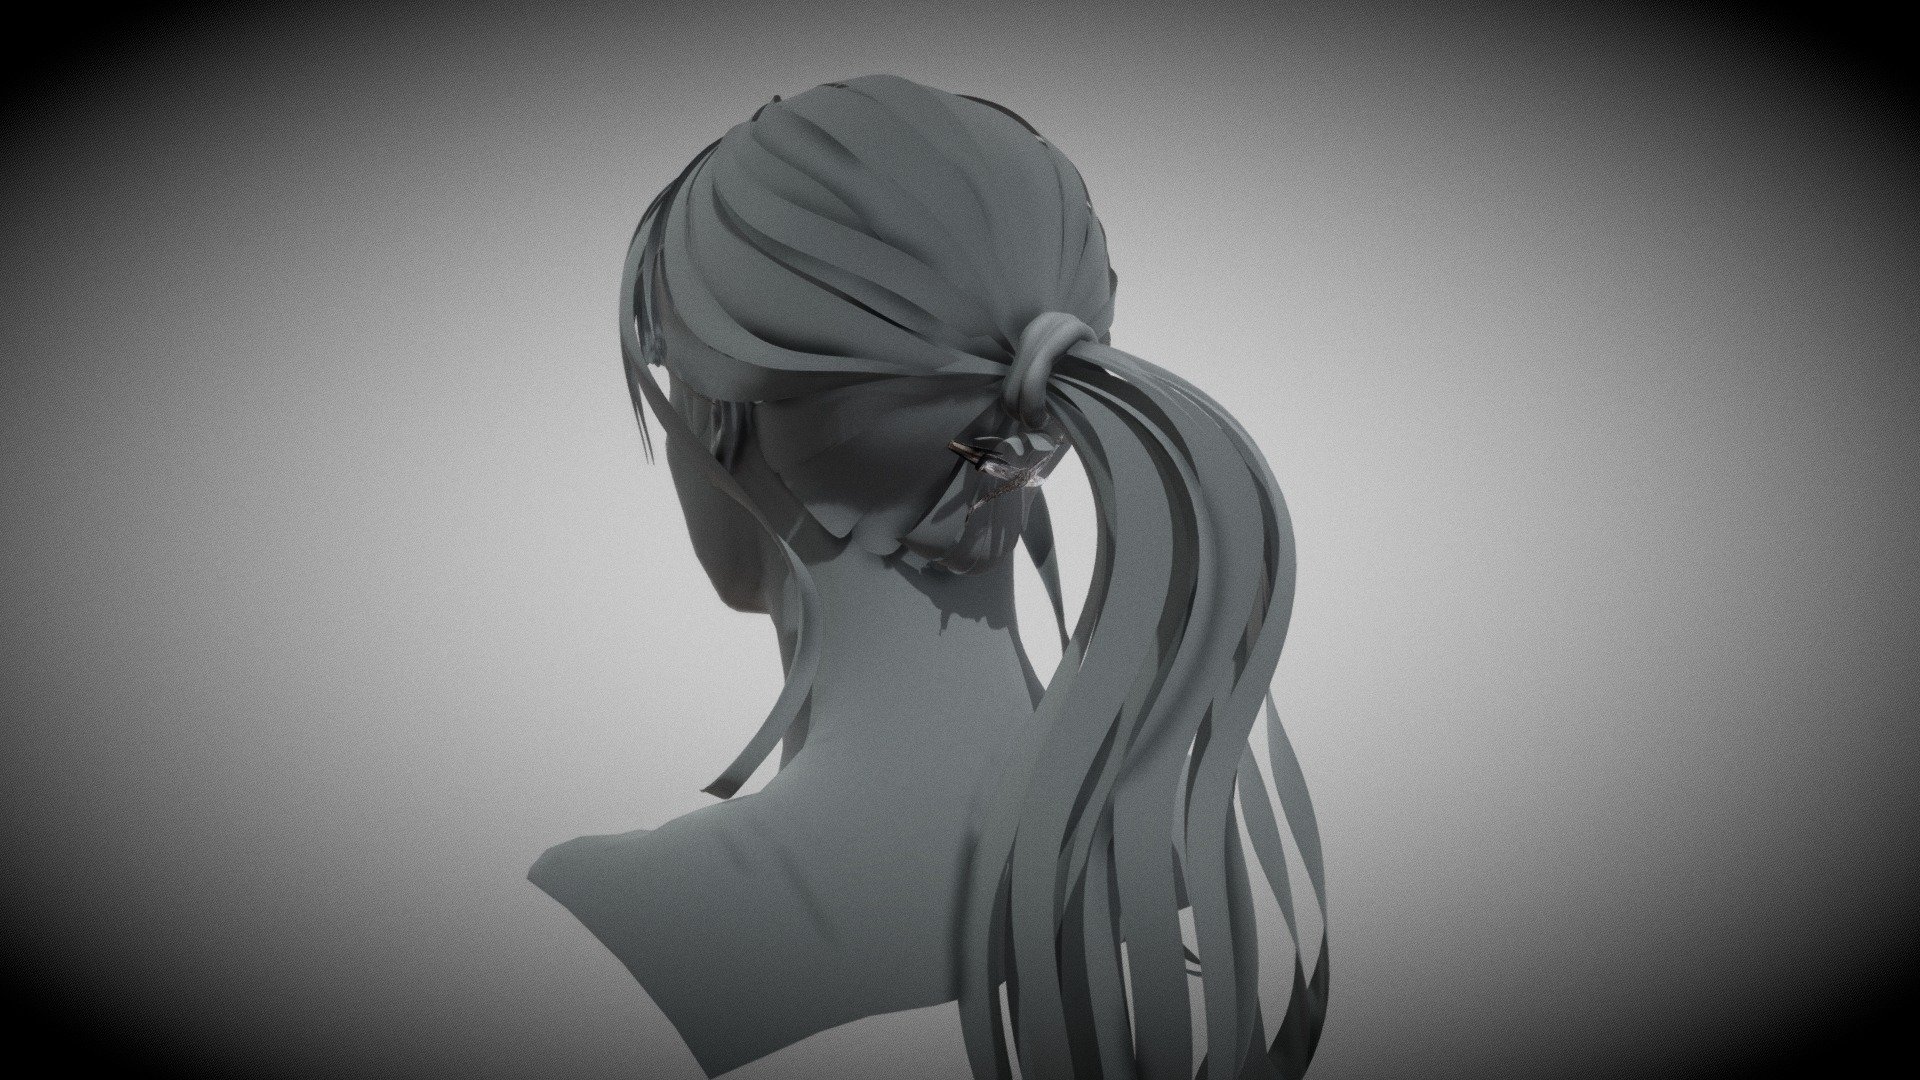 Demo Version: https://skfb.ly/6P9RA (Here can download FBX for reviewing)

Please purchase the full version for supporting and helping me work further and better~

I am rebuilding the character codenamed Ray (https://skfb.ly/6MNyS). 

Here is her new hairpin created by blender 2.81.

It suits her new hair style:https://skfb.ly/6P8FO(Full Version)https://skfb.ly/6P8Fp(Demo)

The 3d models &ldquo;human_female_base